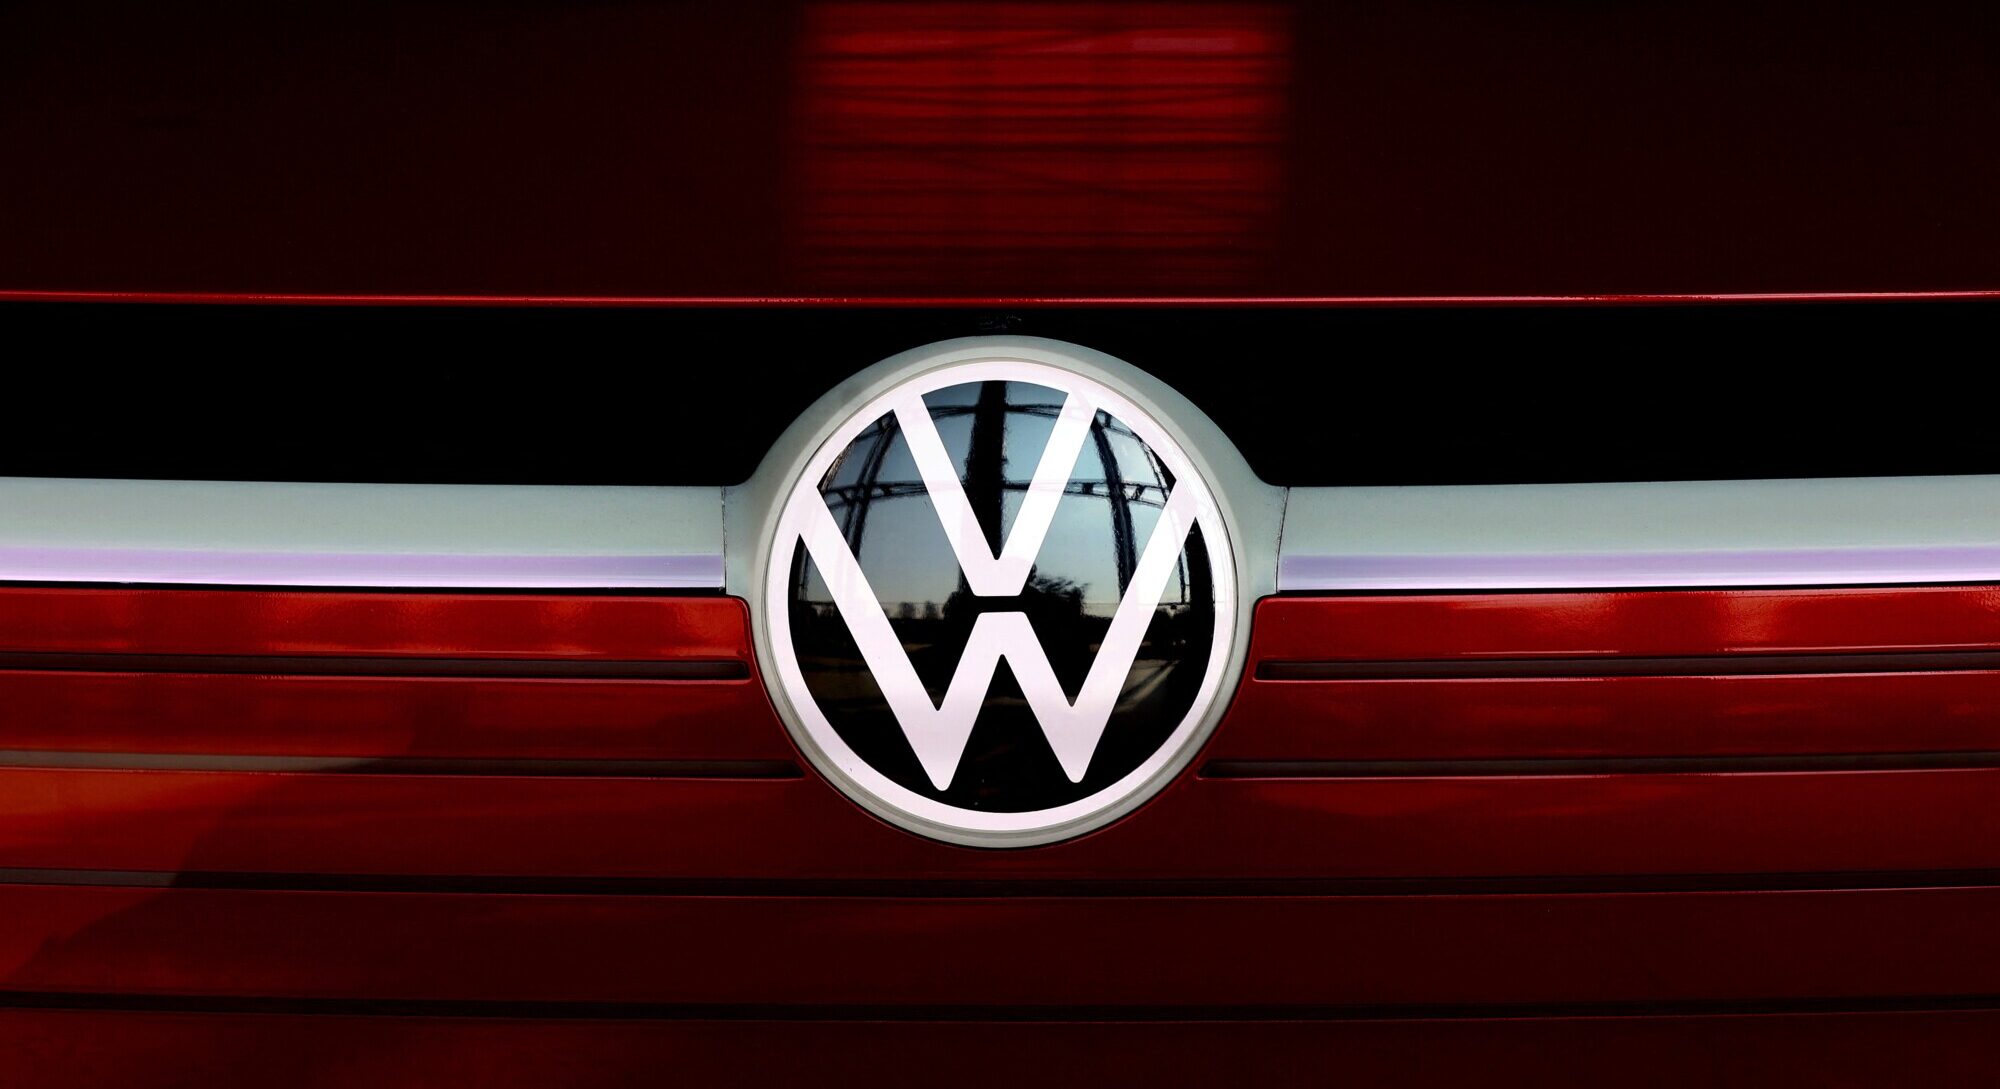 US Agency Opens 2 Safety Probes of Volkswagen, Audi Vehicles